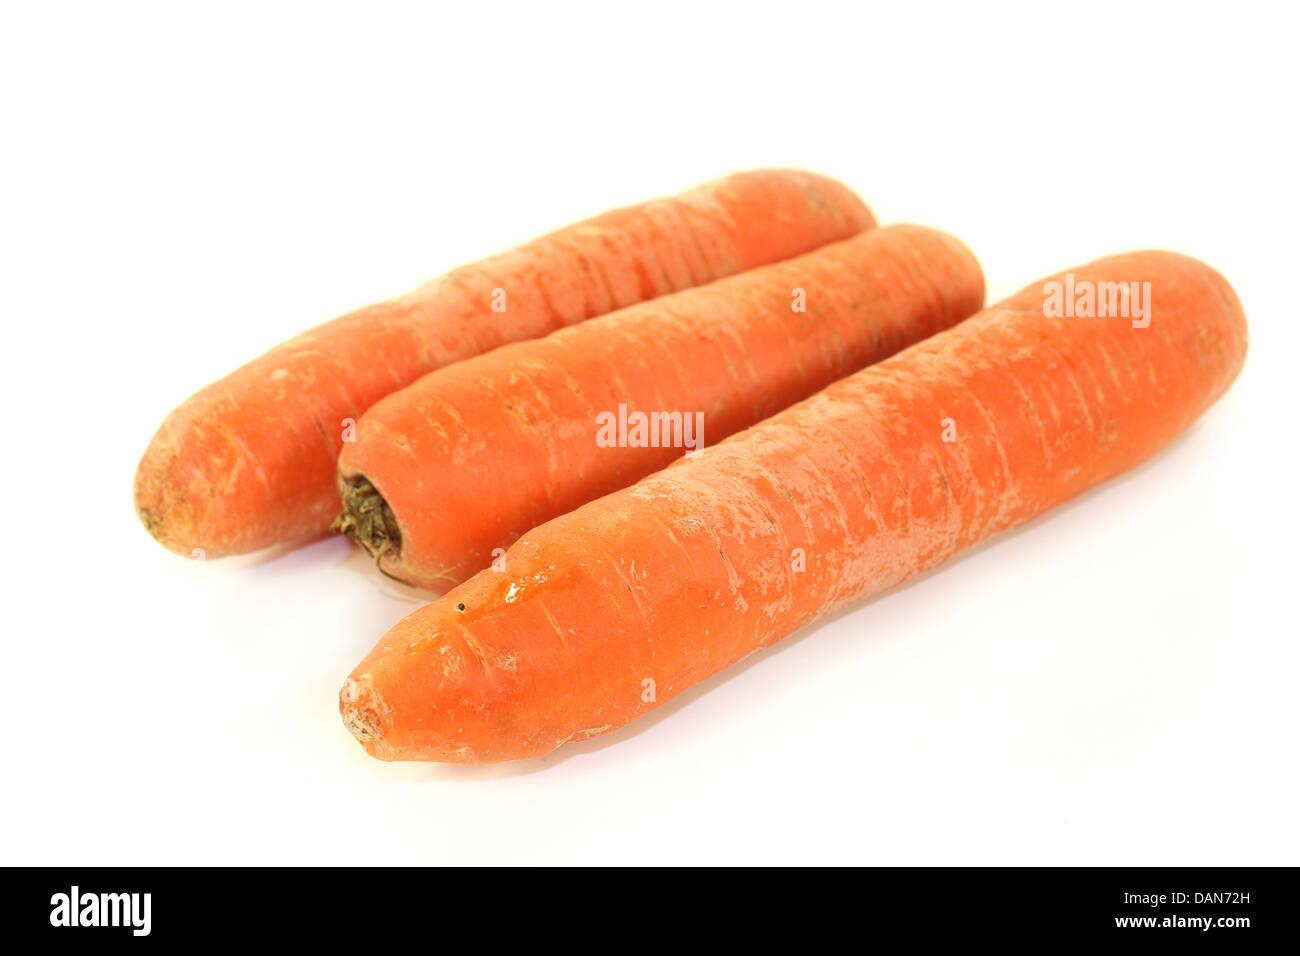 raw carrots in front of white background Stock Photo